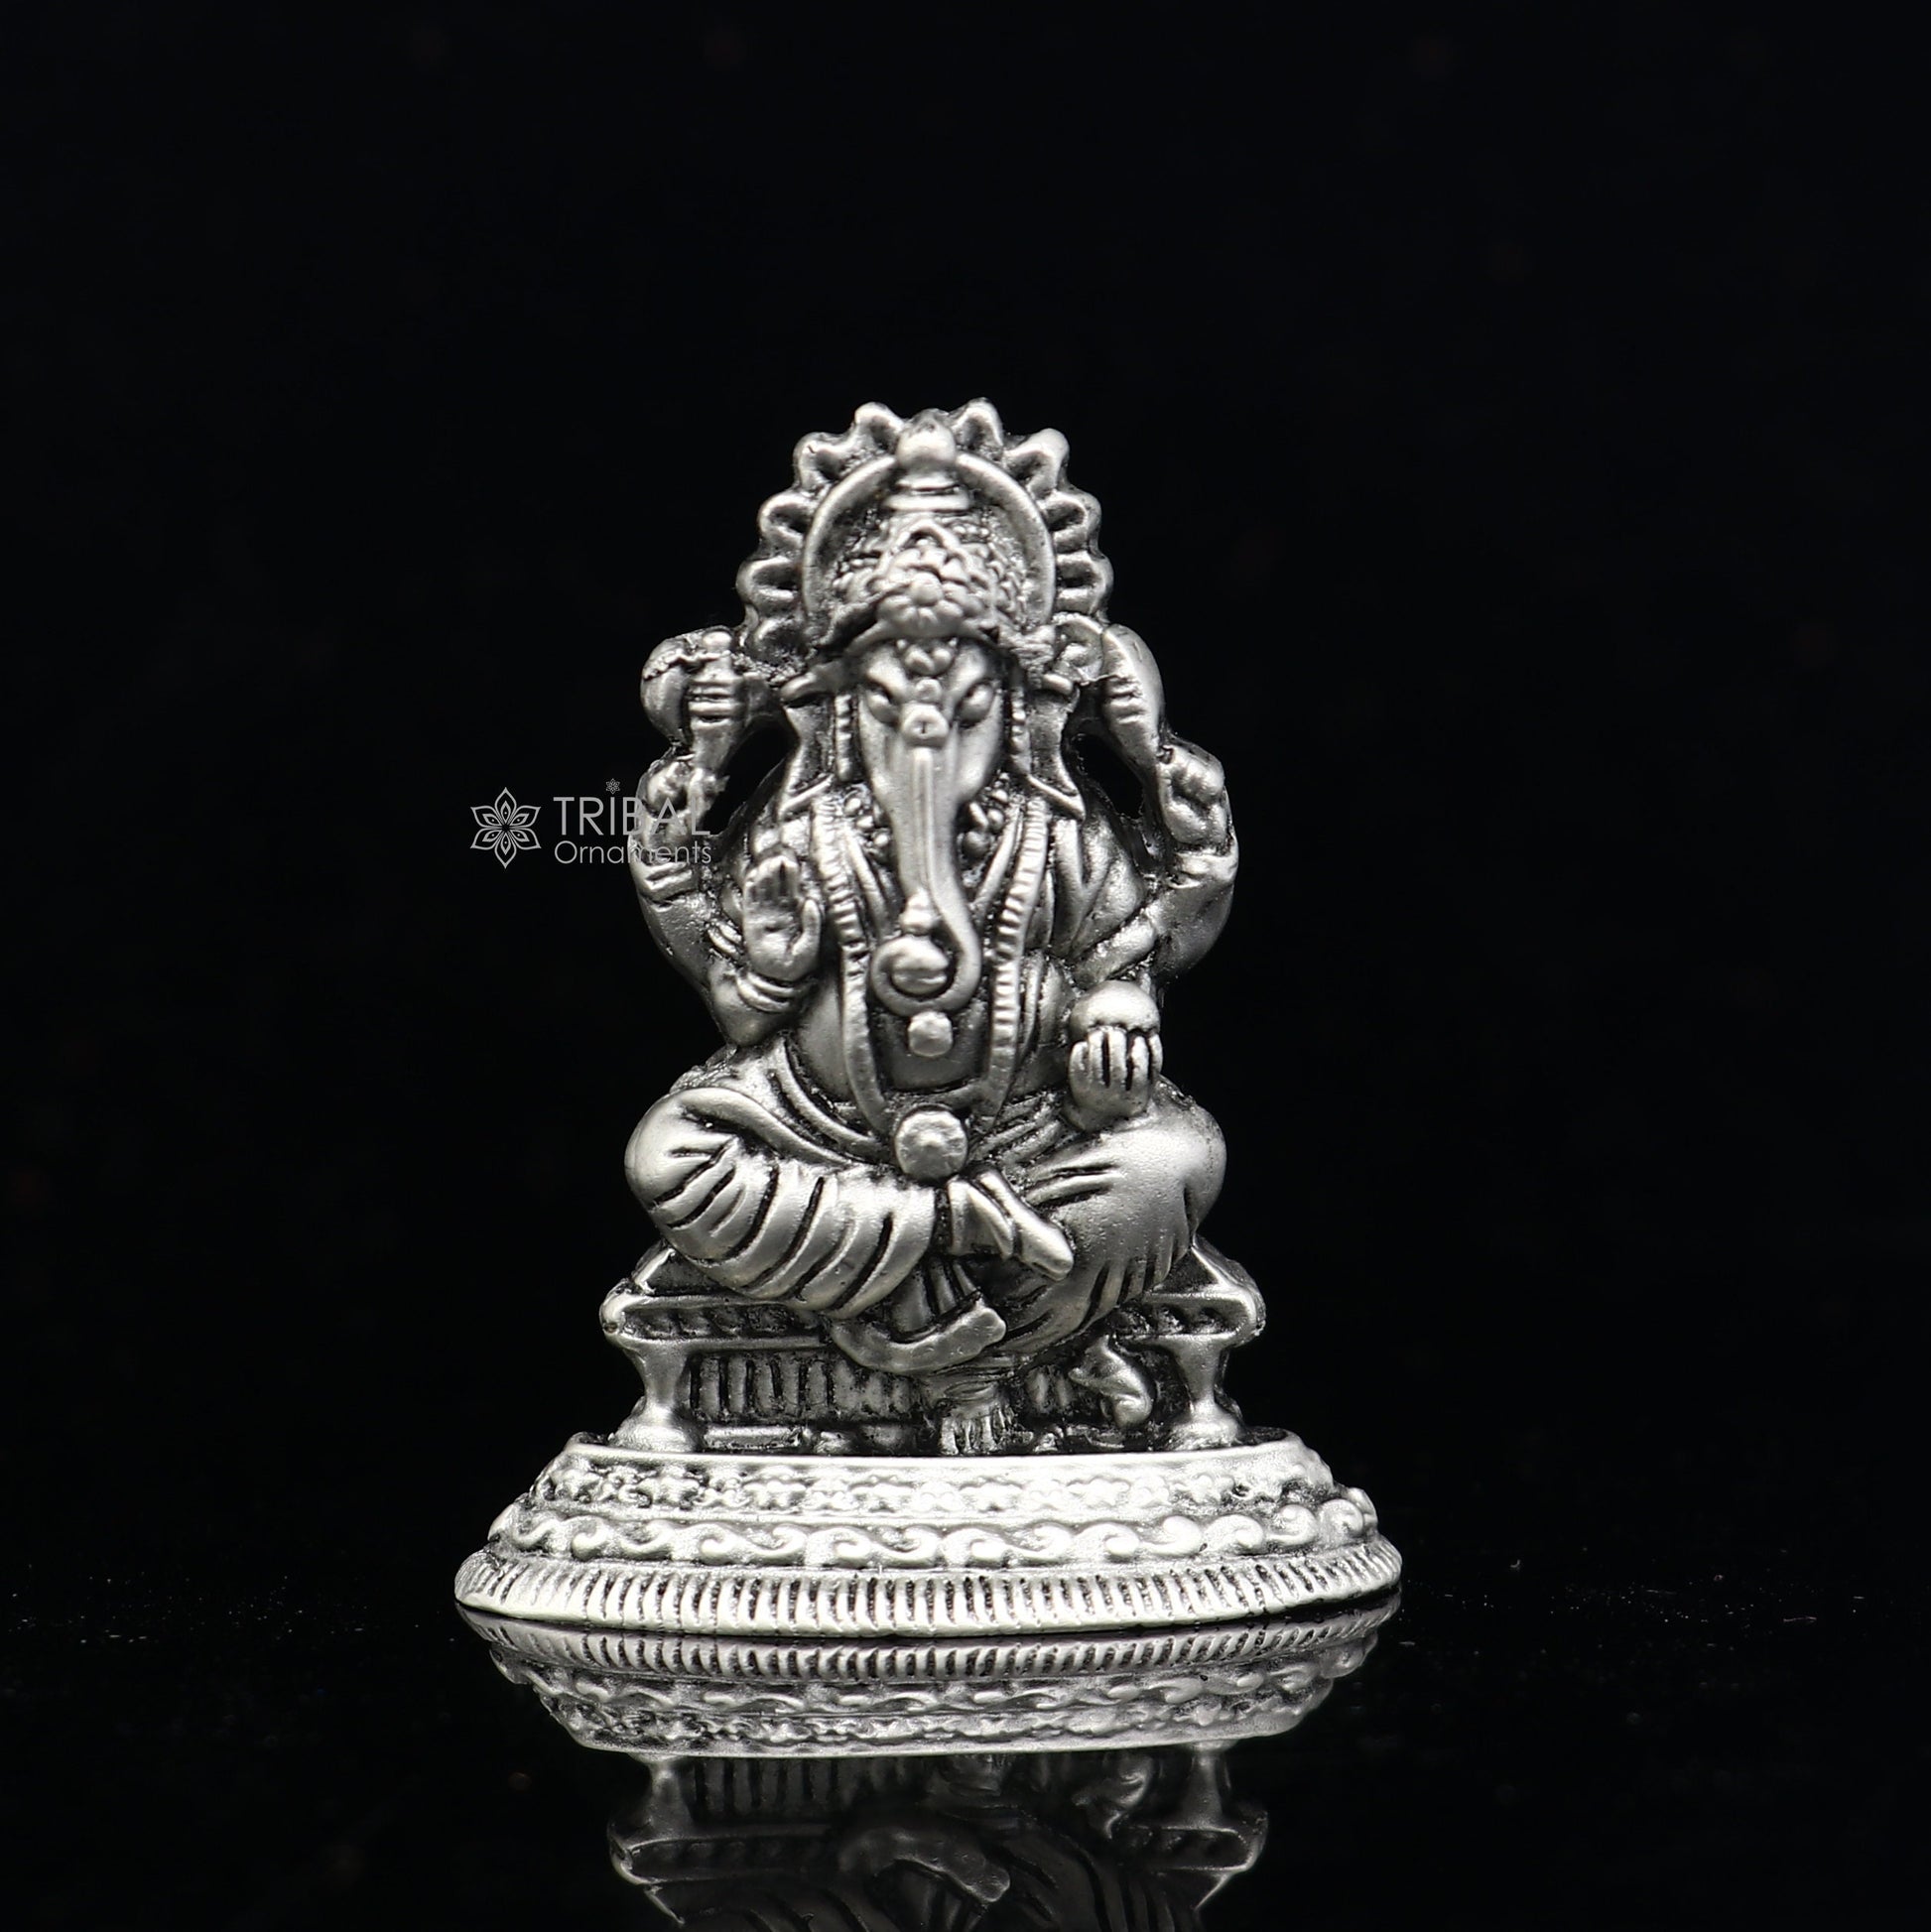 925 Sterling silver Divine lord idol Ganesha statue art, best puja figurine for home temple for wealth and prosperity art731 - TRIBAL ORNAMENTS